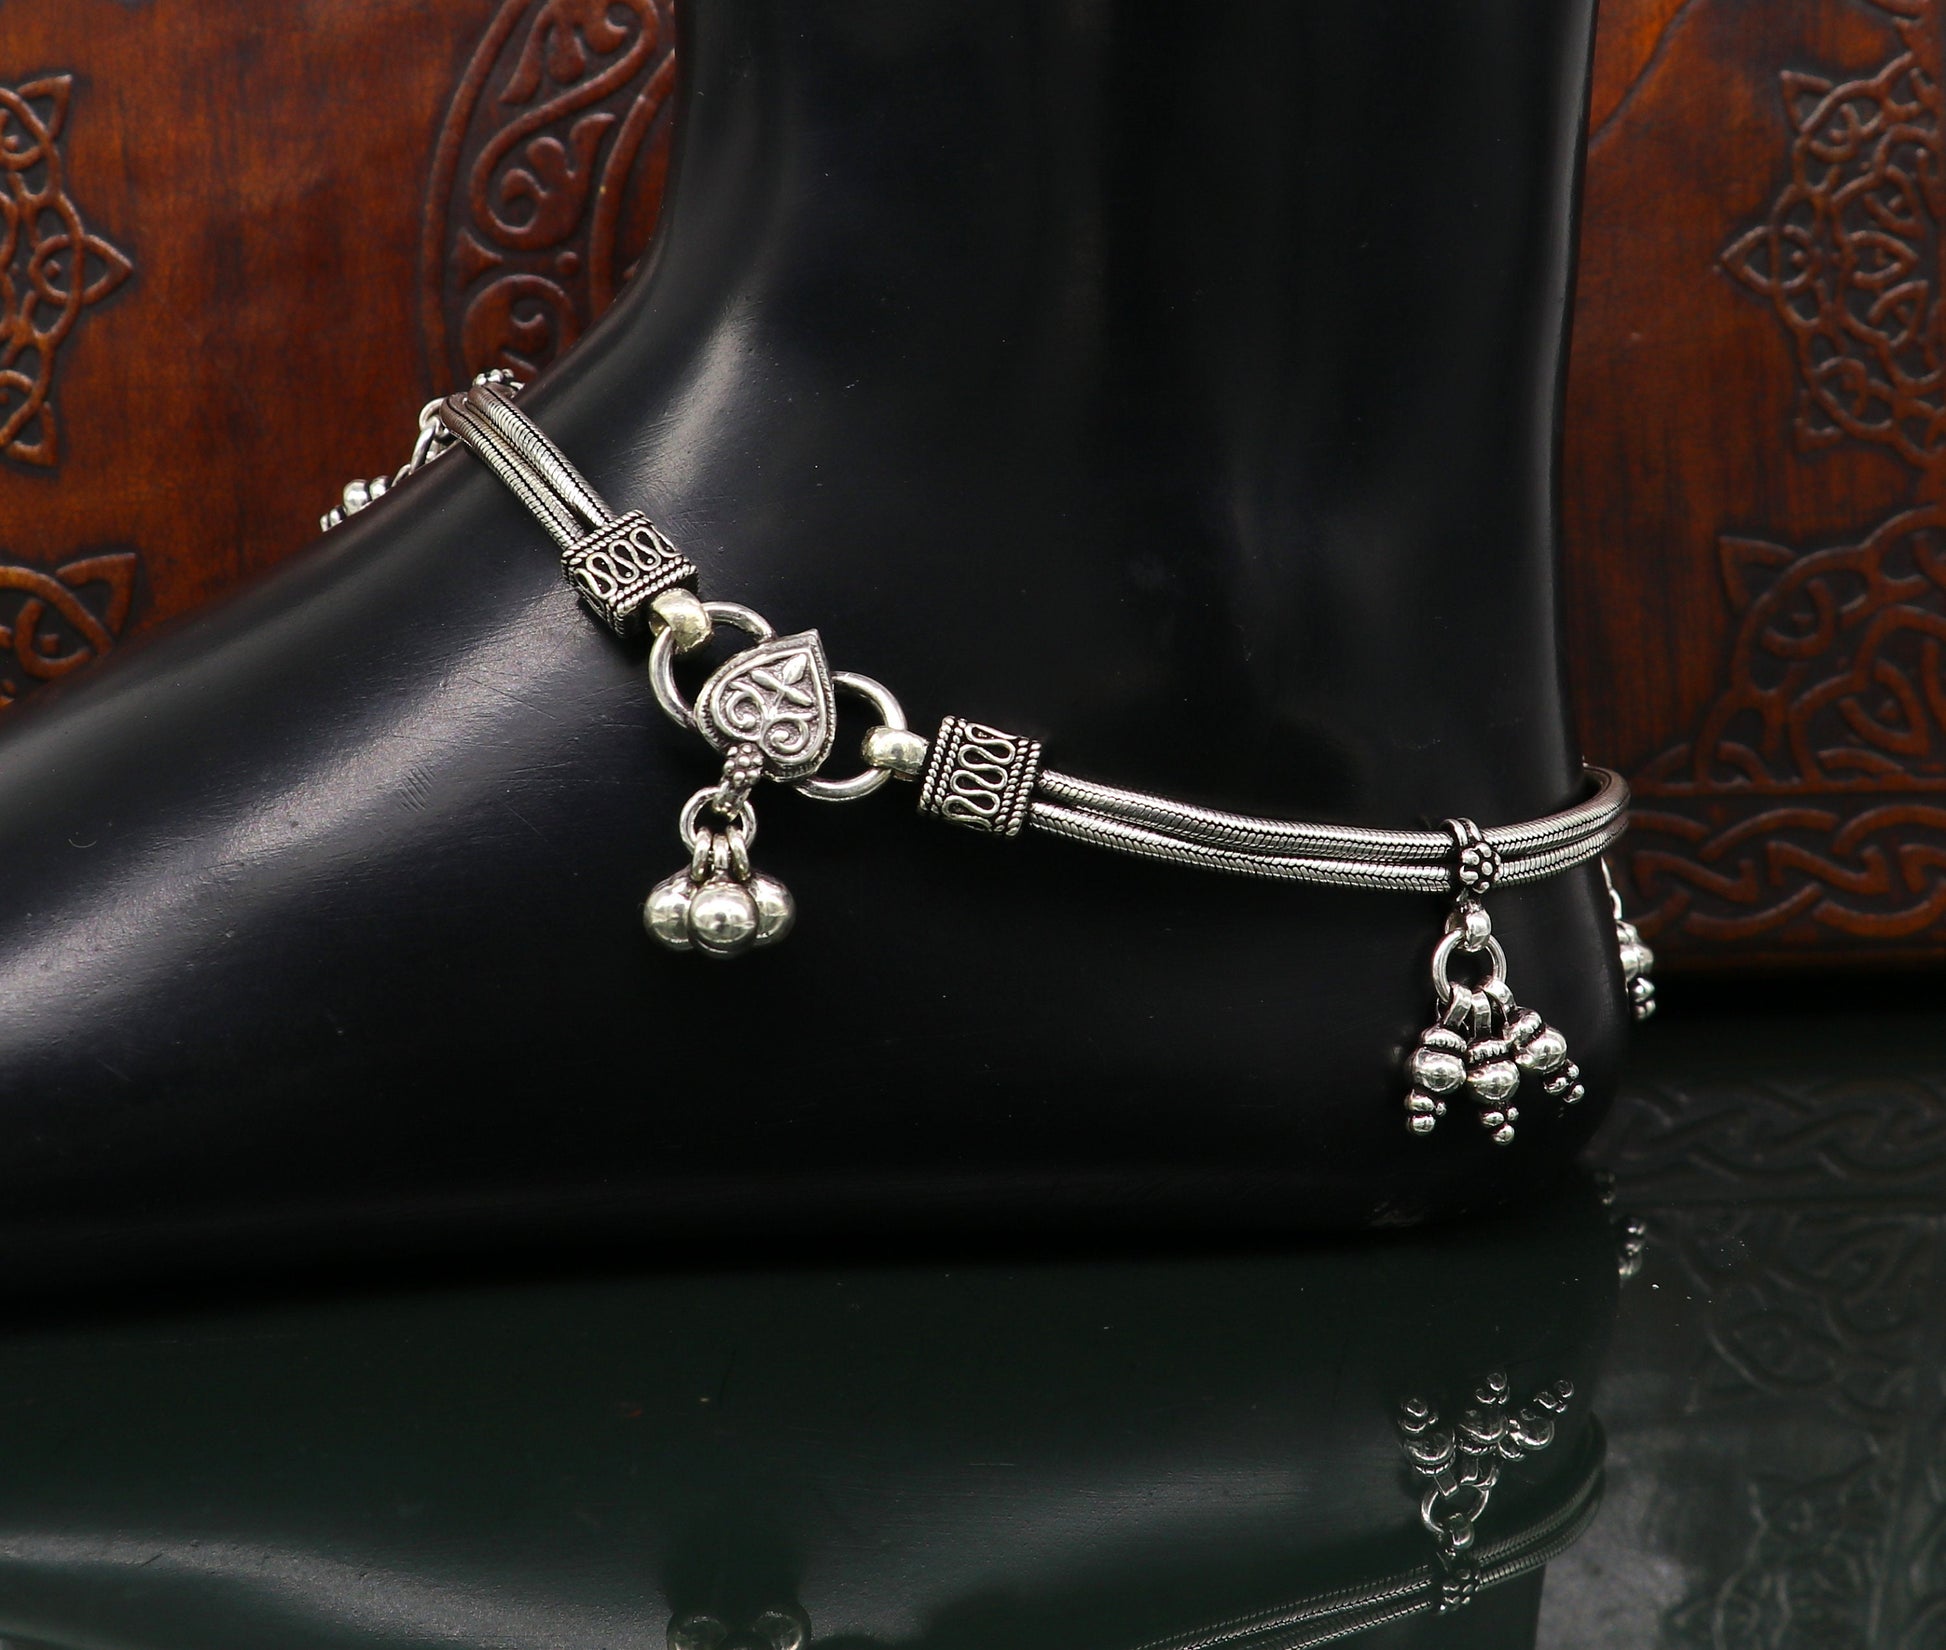 10.5" 925 Sterling silver Vintage style customized snake chain anklets, ankle bracelet, foot bracelet with hanging bells jewelry ank333 - TRIBAL ORNAMENTS